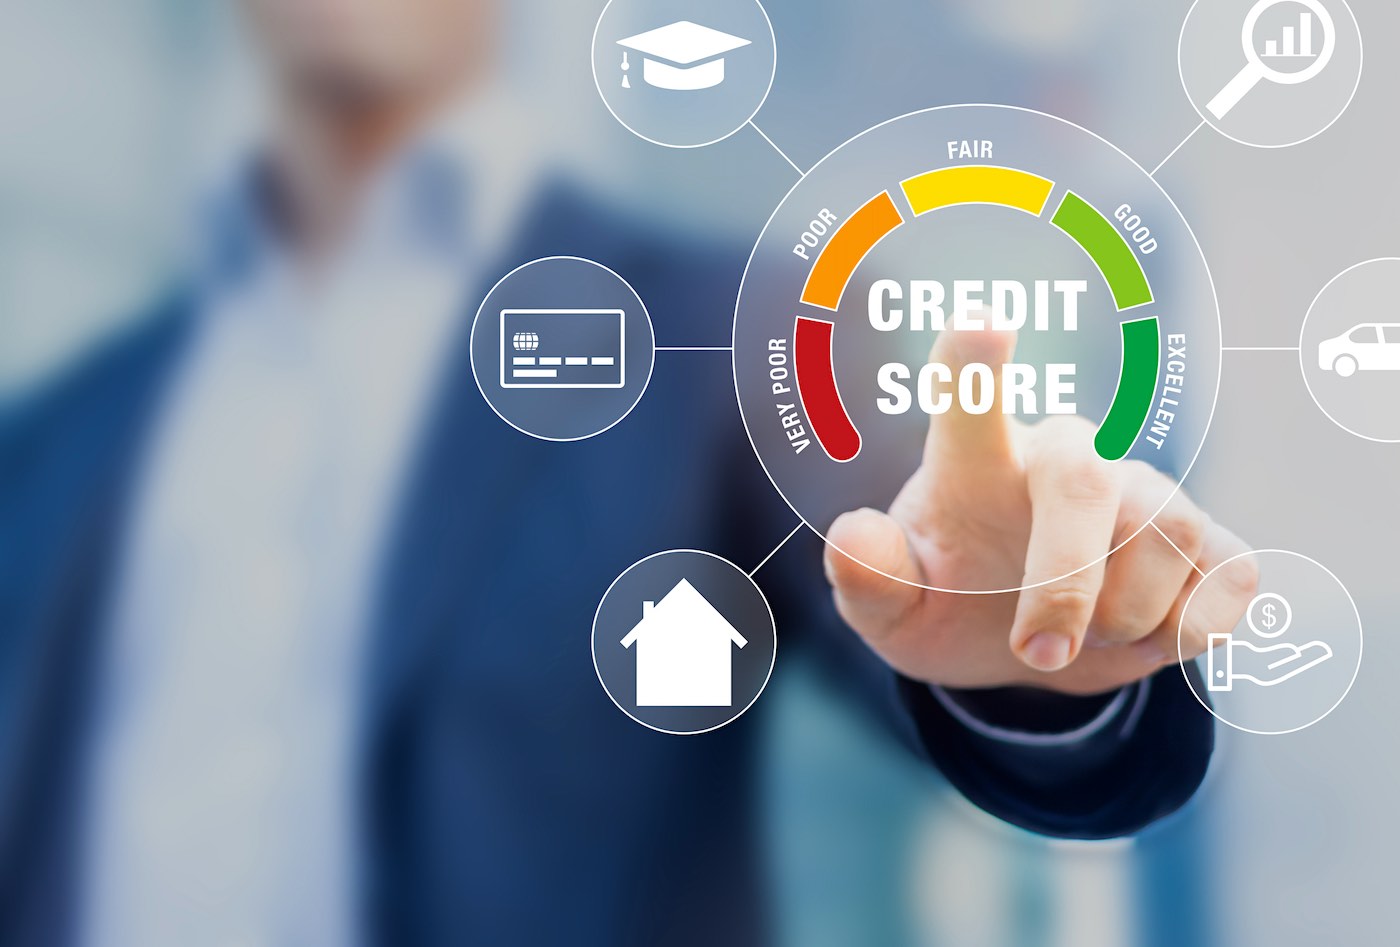 don't apply for credit you don't need